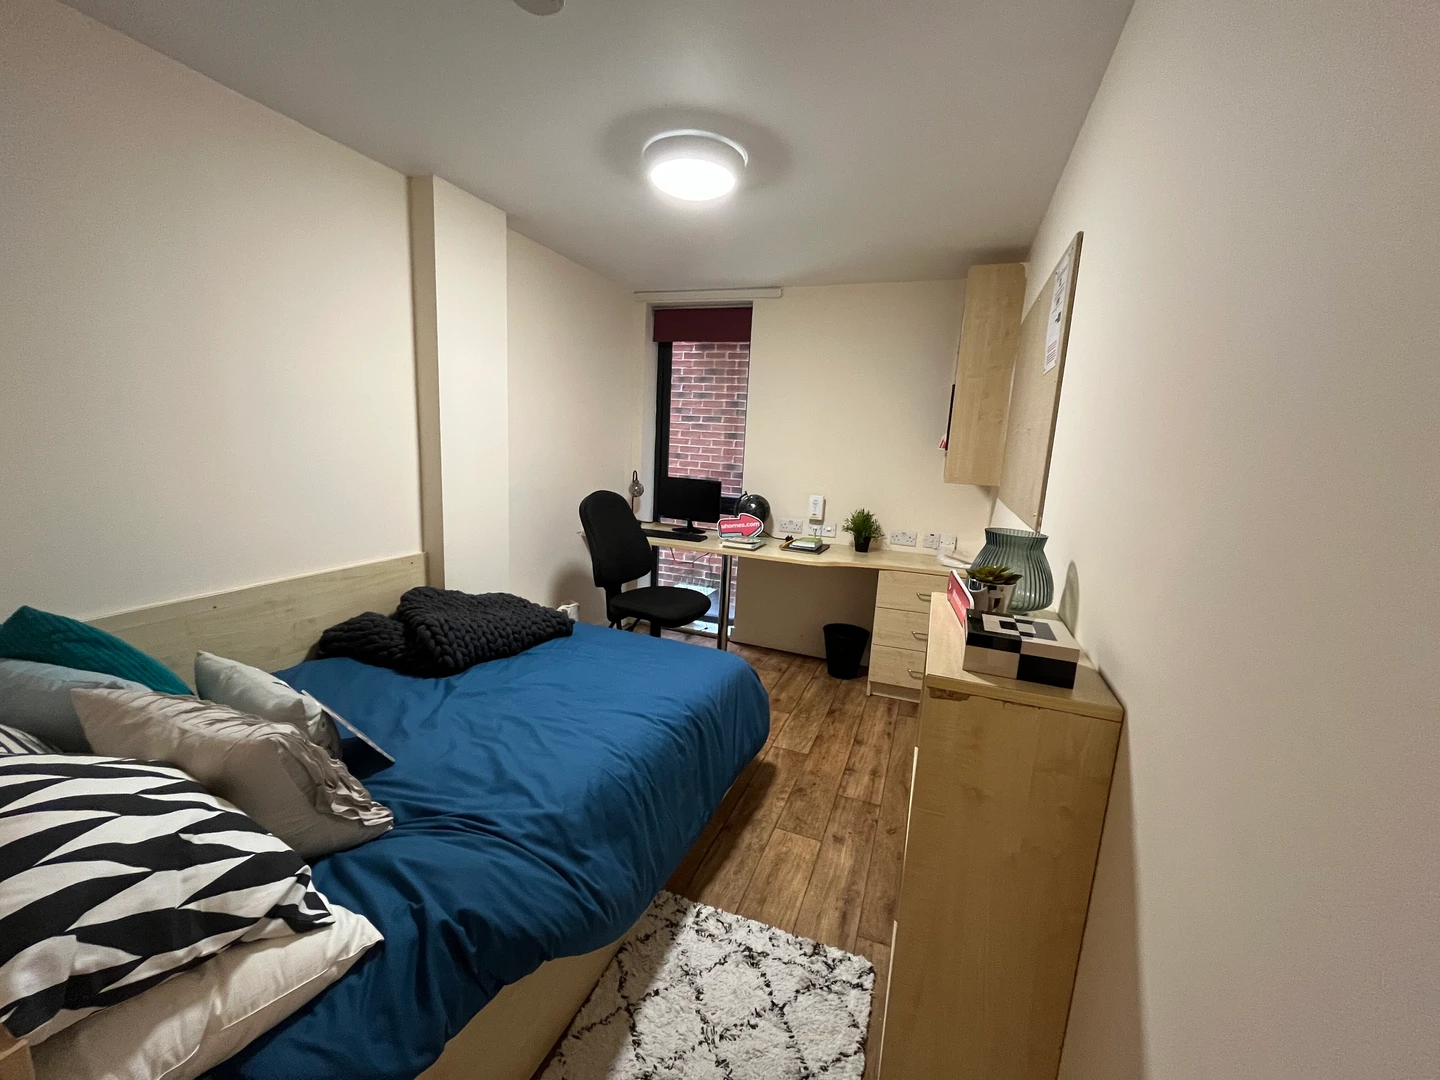 Renting rooms by the month in Sheffield